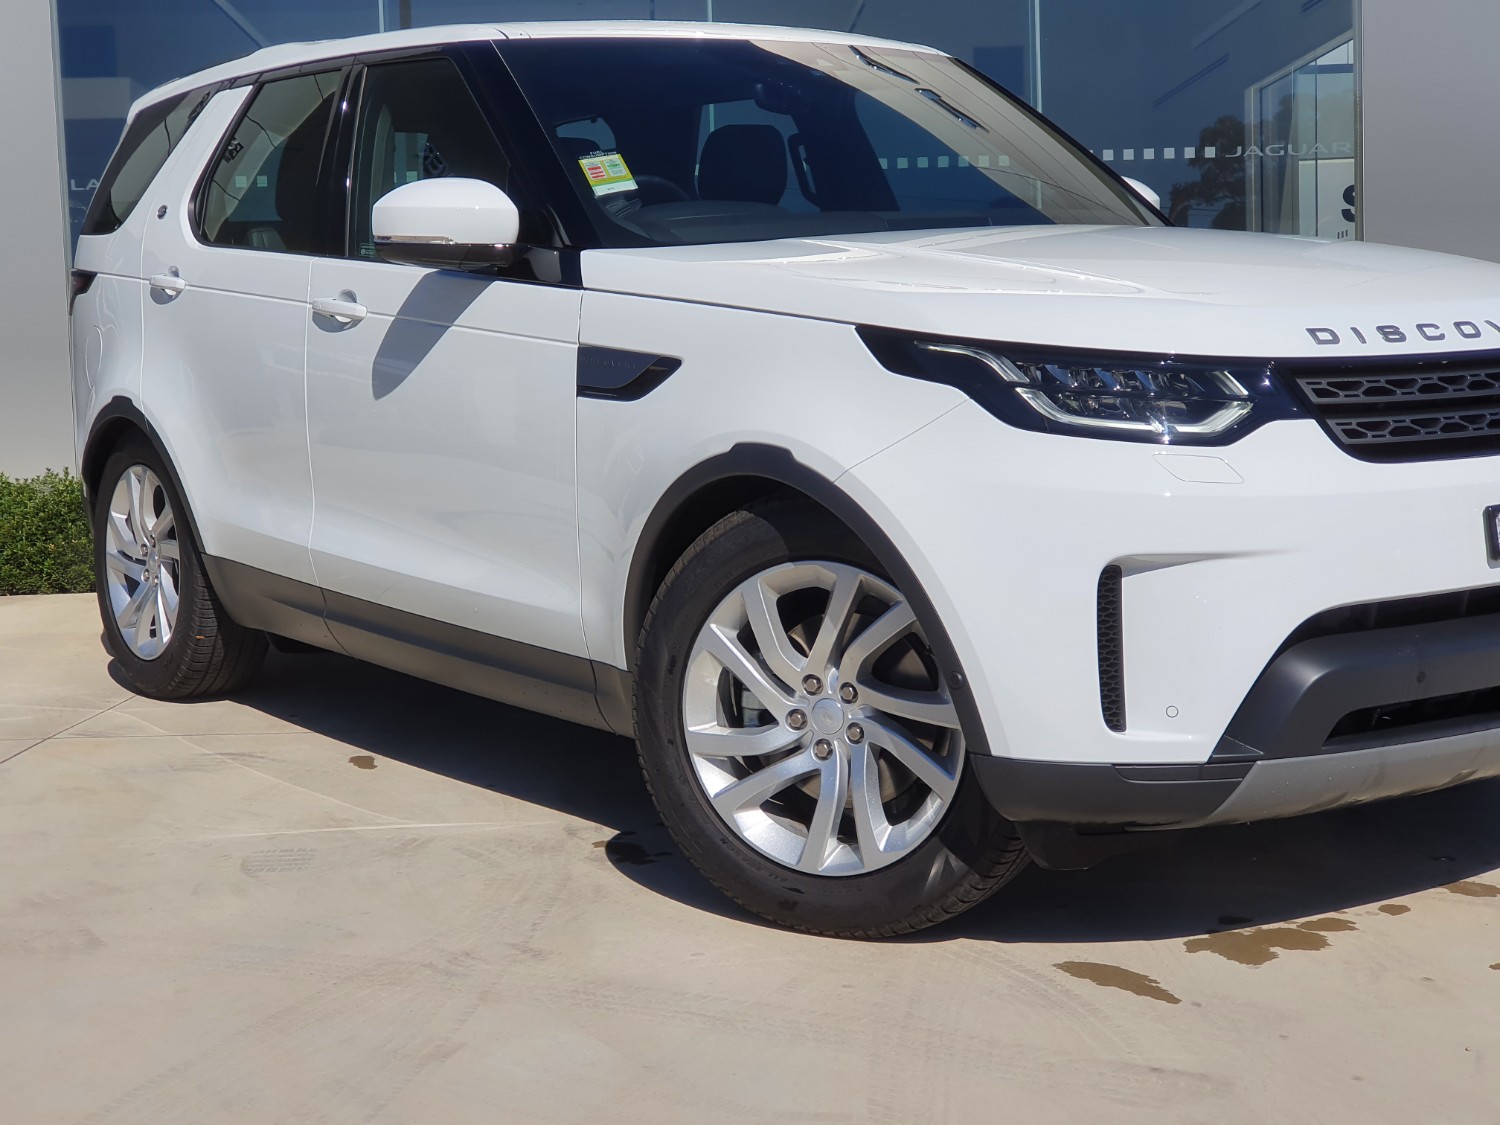 2020 Land Rover Discovery 4 DI Wagon Image 27